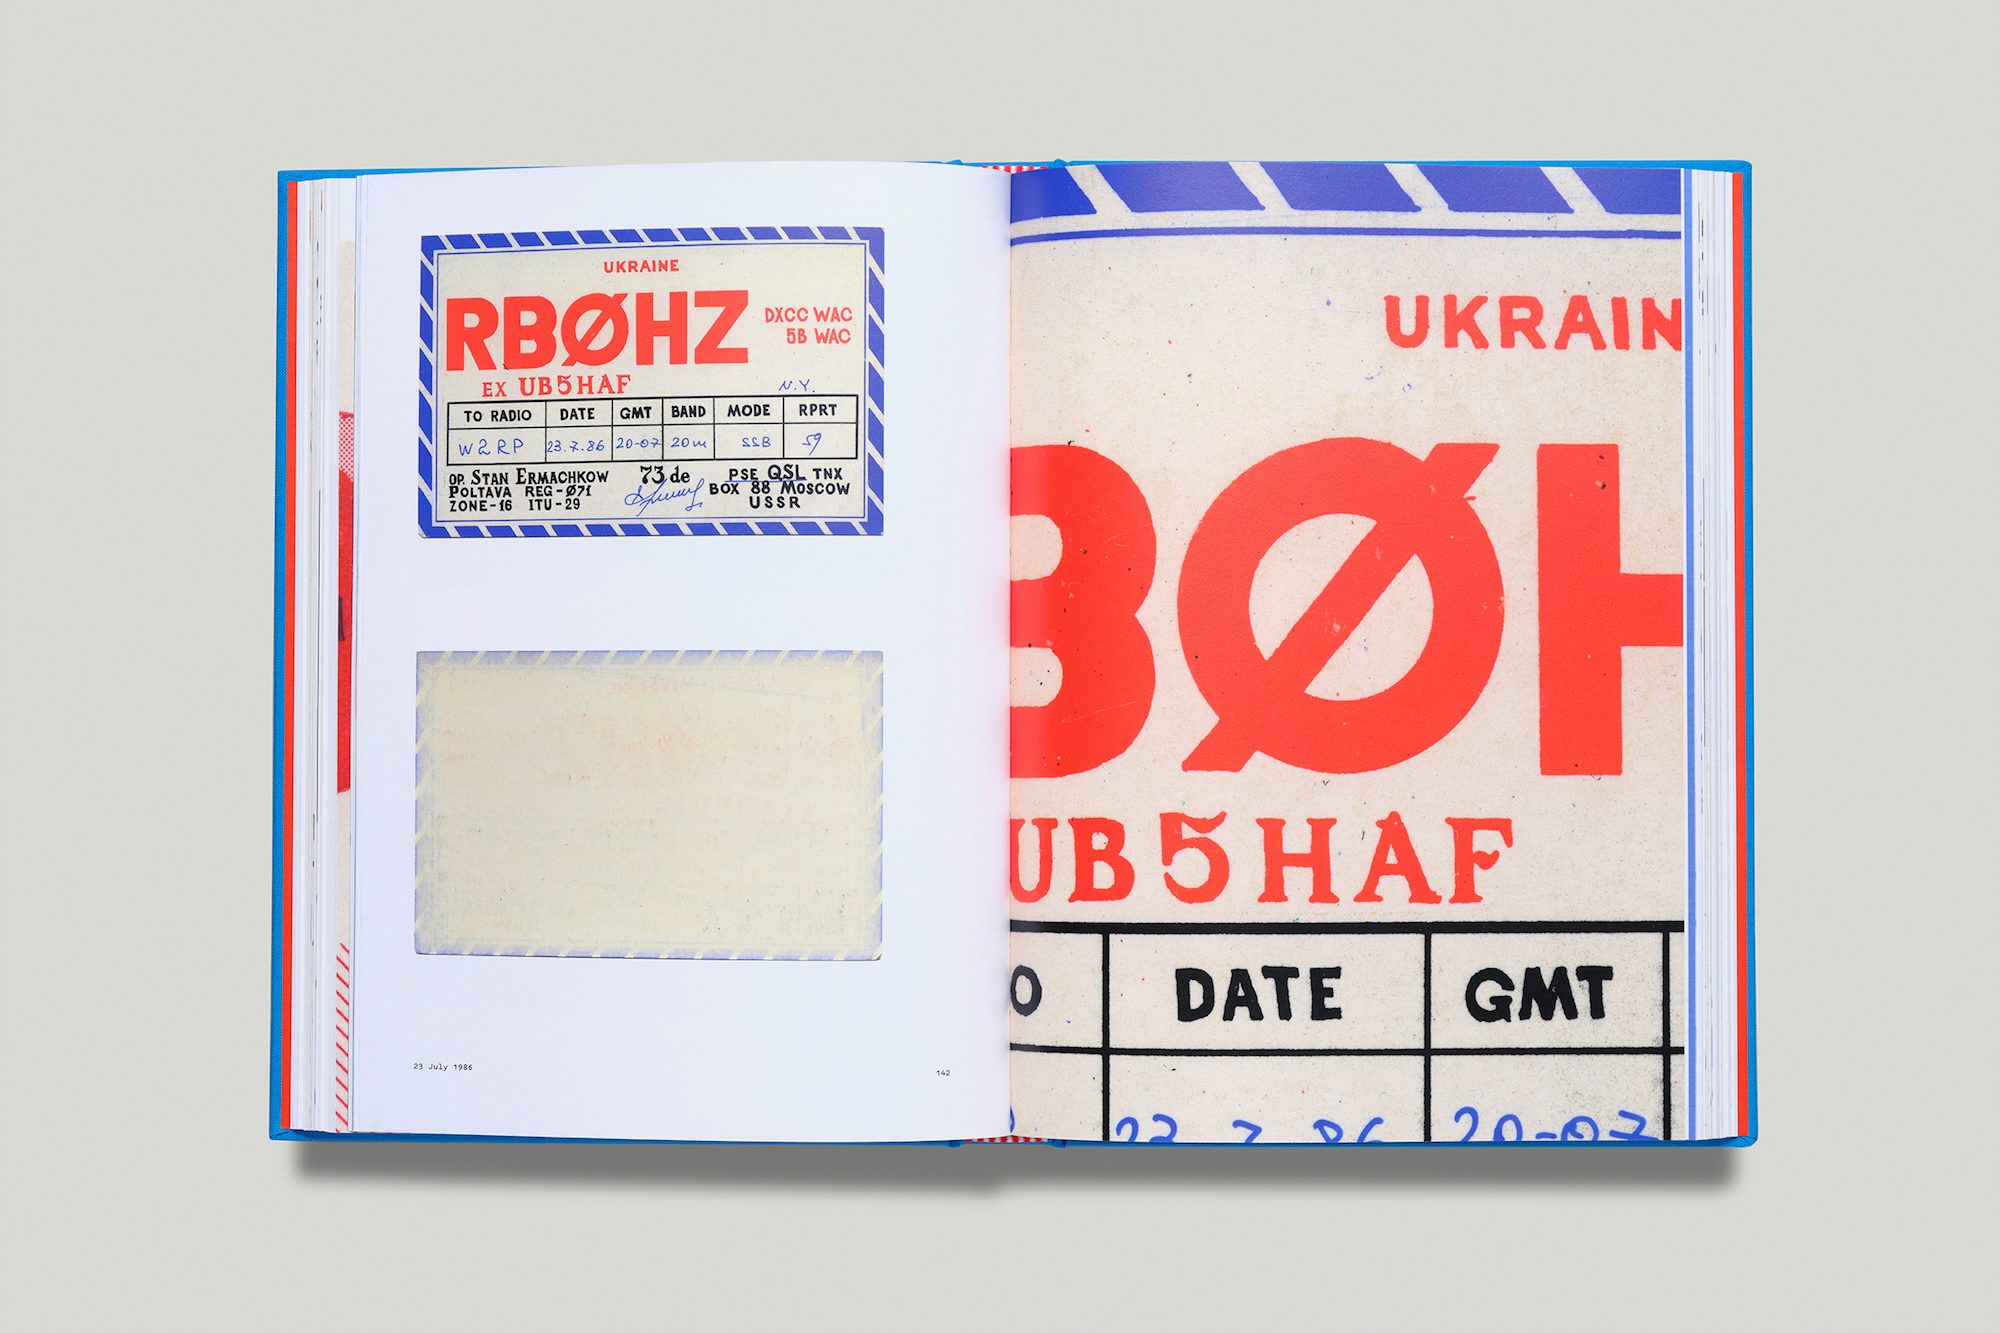 QSL? (Do You Confirm Receipt of My Transmission?), published by Standards Manual